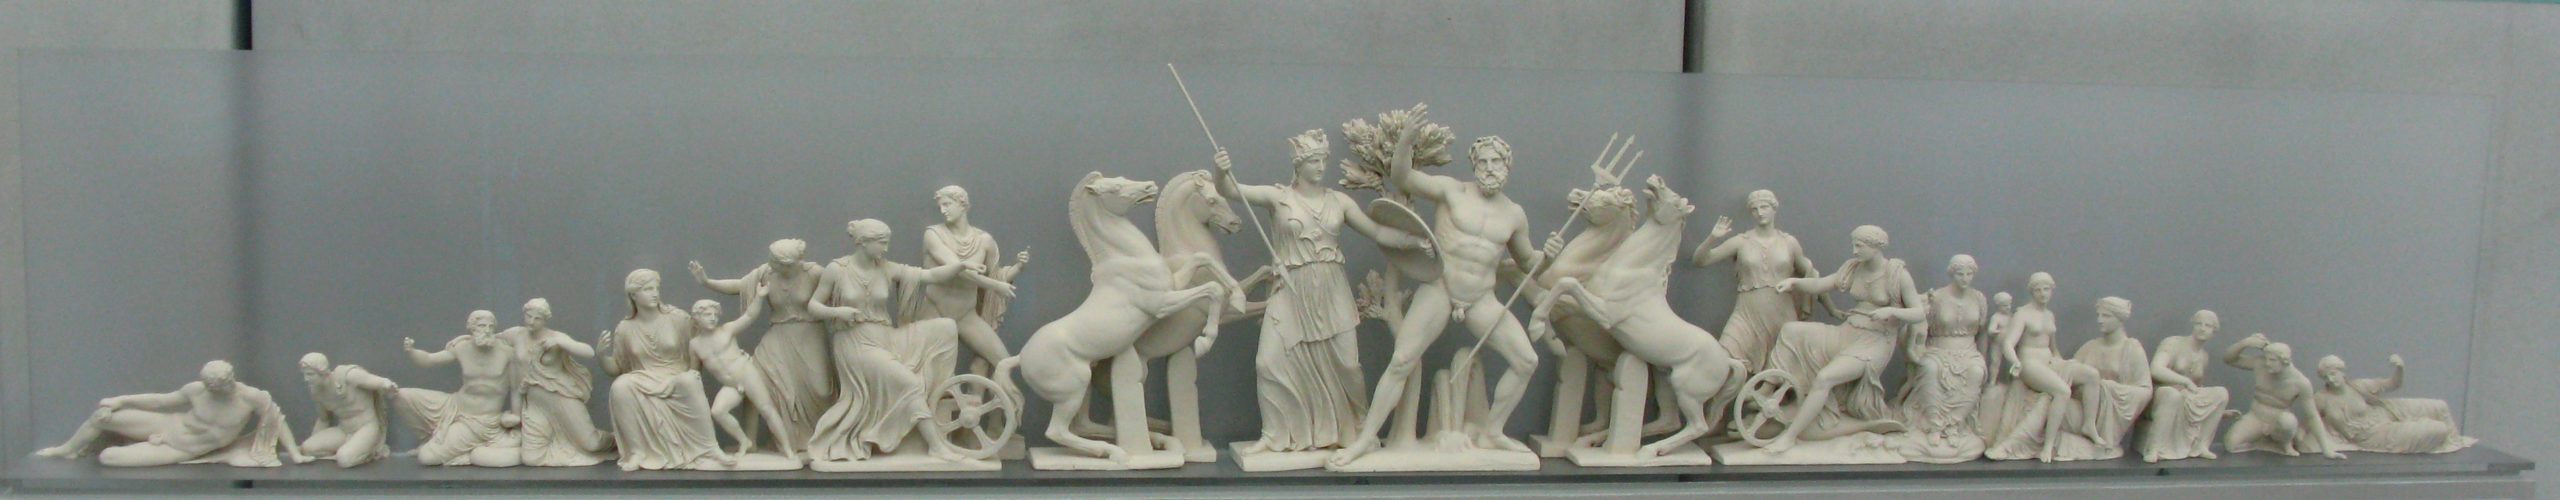 In the centre, Athena and Poseidon with an olive tree. They are flanked by horses and chariots on either side, as well as a number of human figures.